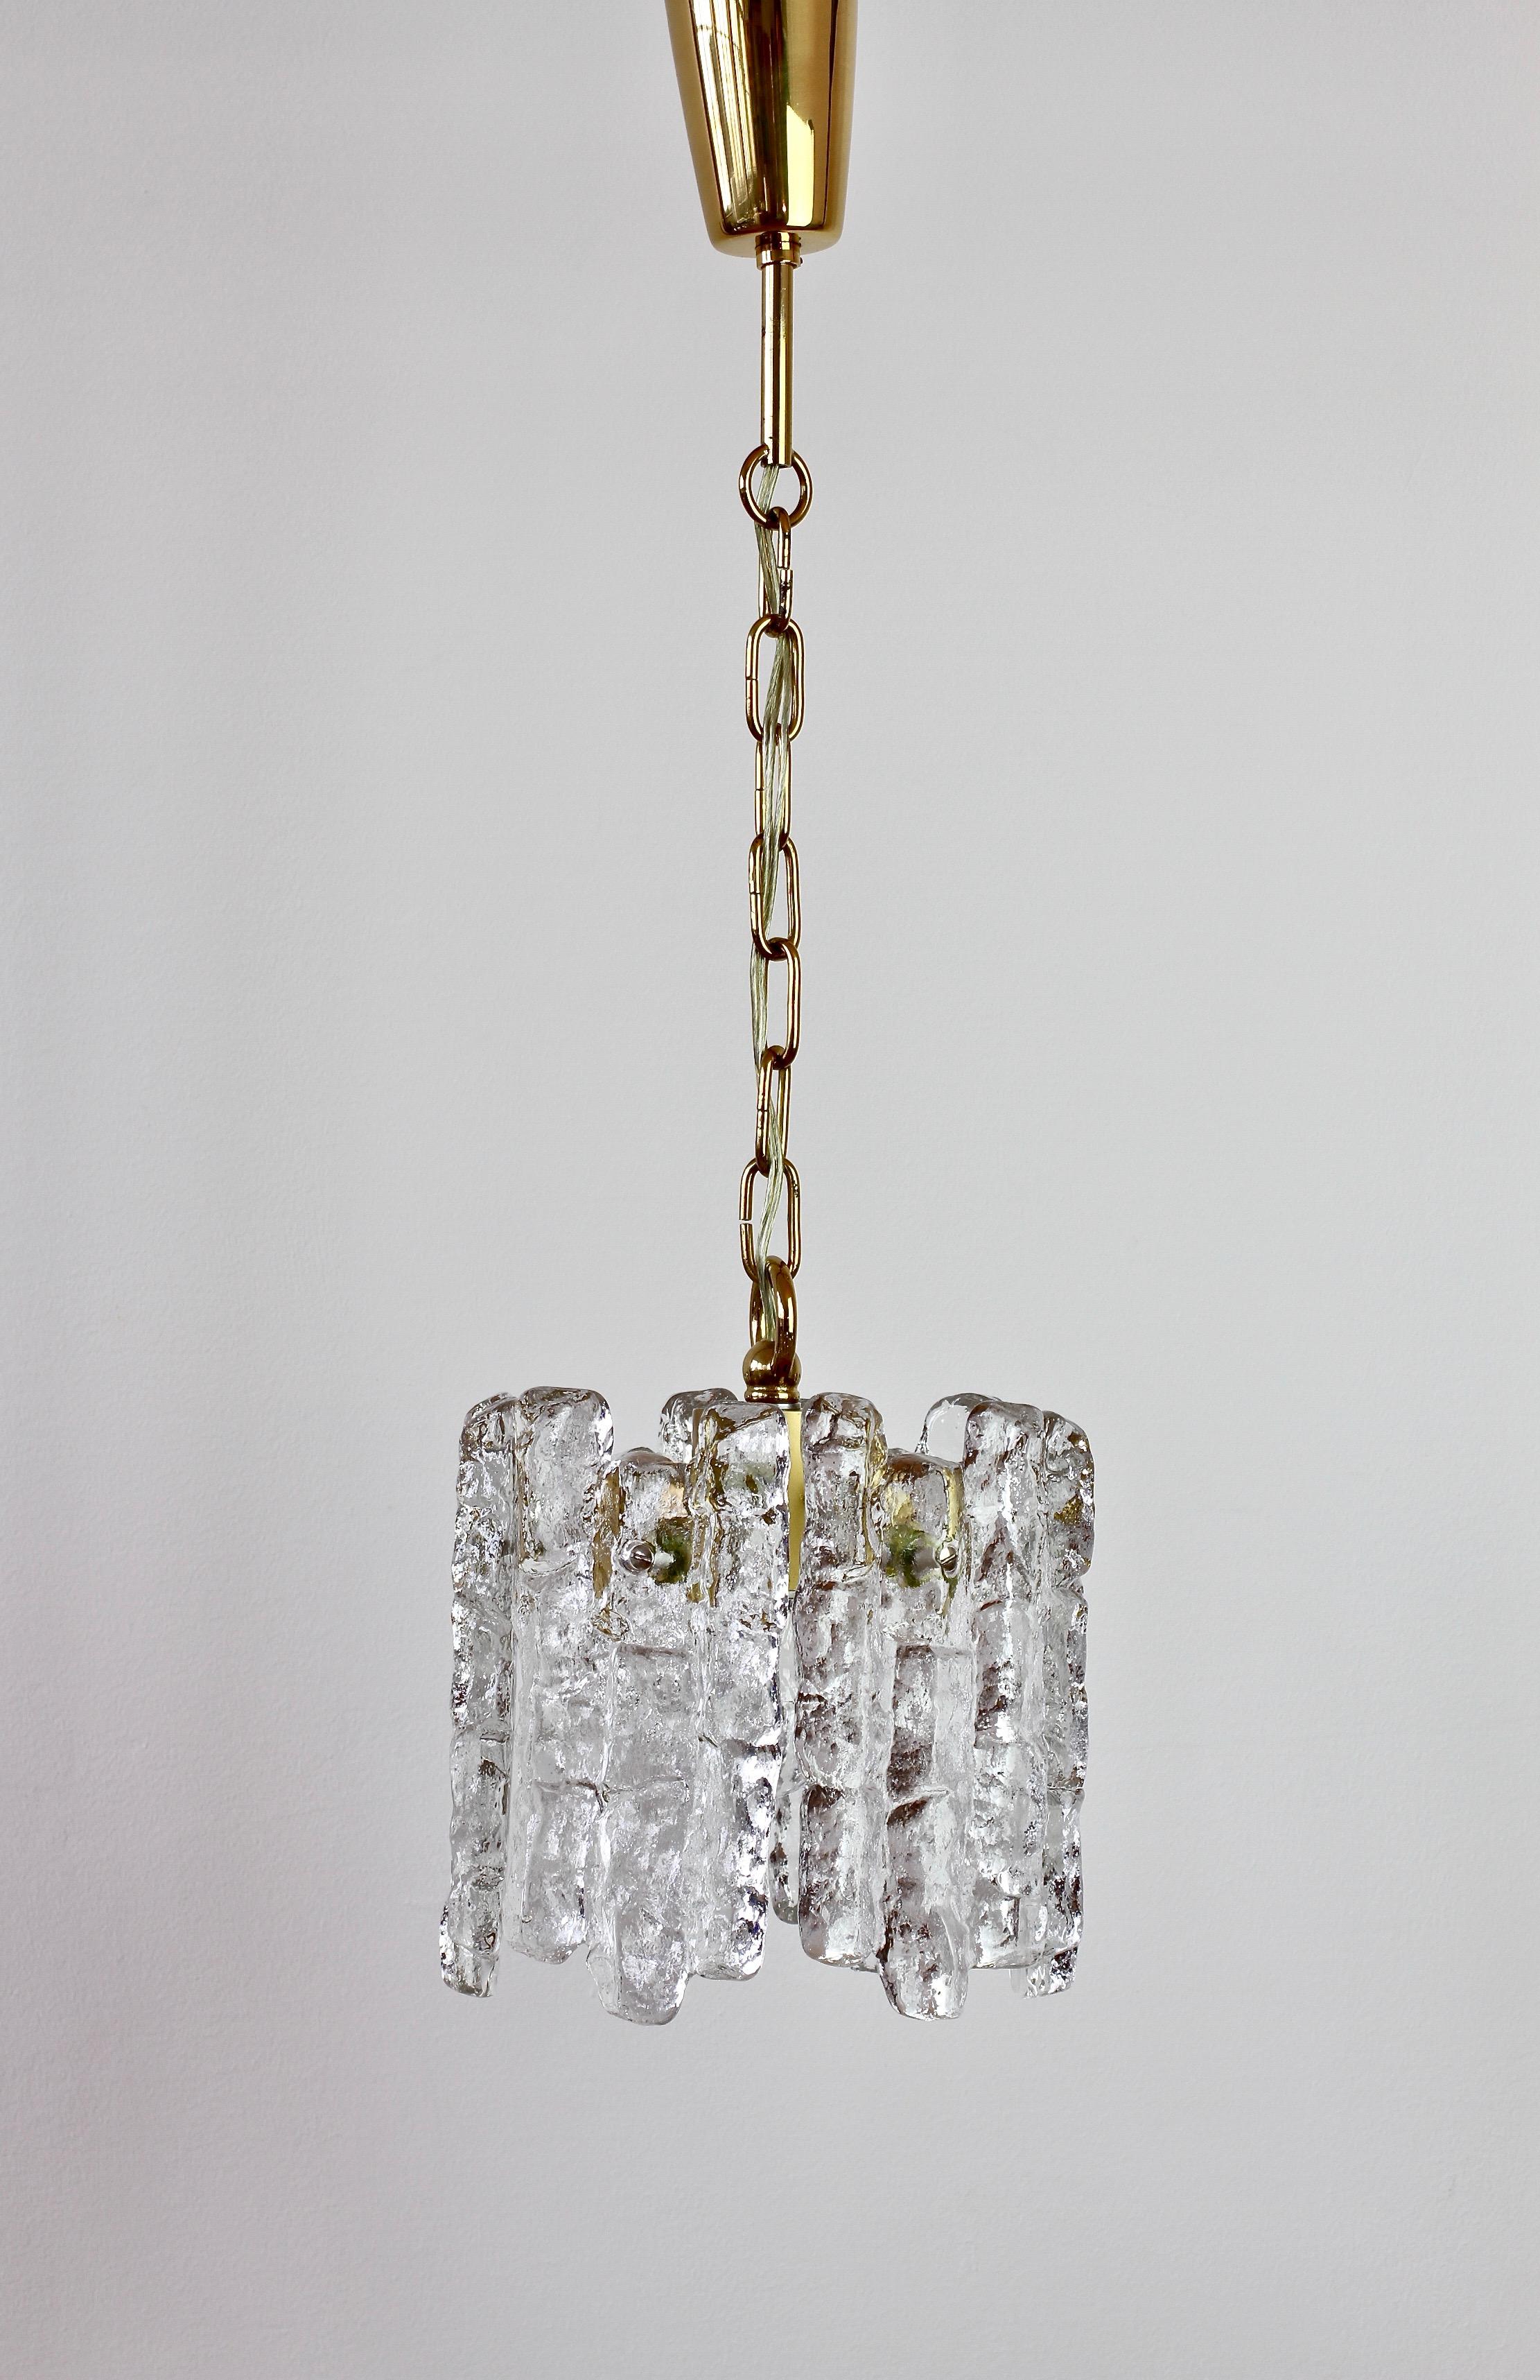 Vintage midcentury Austrian made textured clear ice glass ceiling pendant light or lamp by Kalmar, circa 1960. Featuring six hanging glass elements resembling melting ice crystals suspended from a gilt brass pendant holder. Perfect, relaxed mood